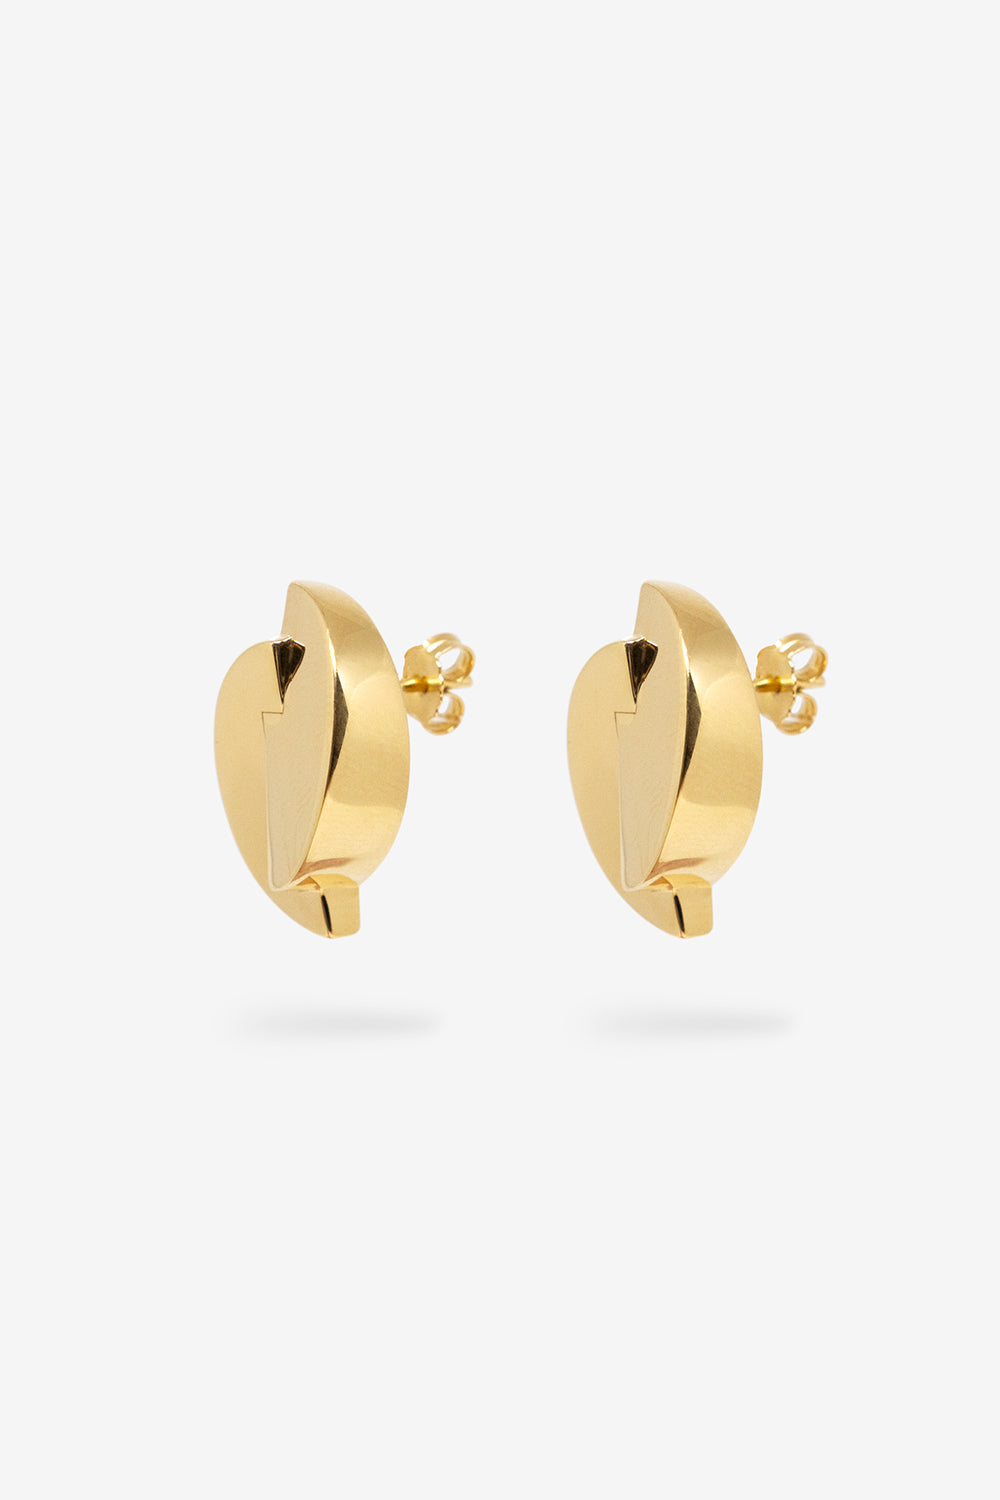 Close-up view of 1989 Dome Earrings in 14k gold vermeil, featuring a hollow design and stud back